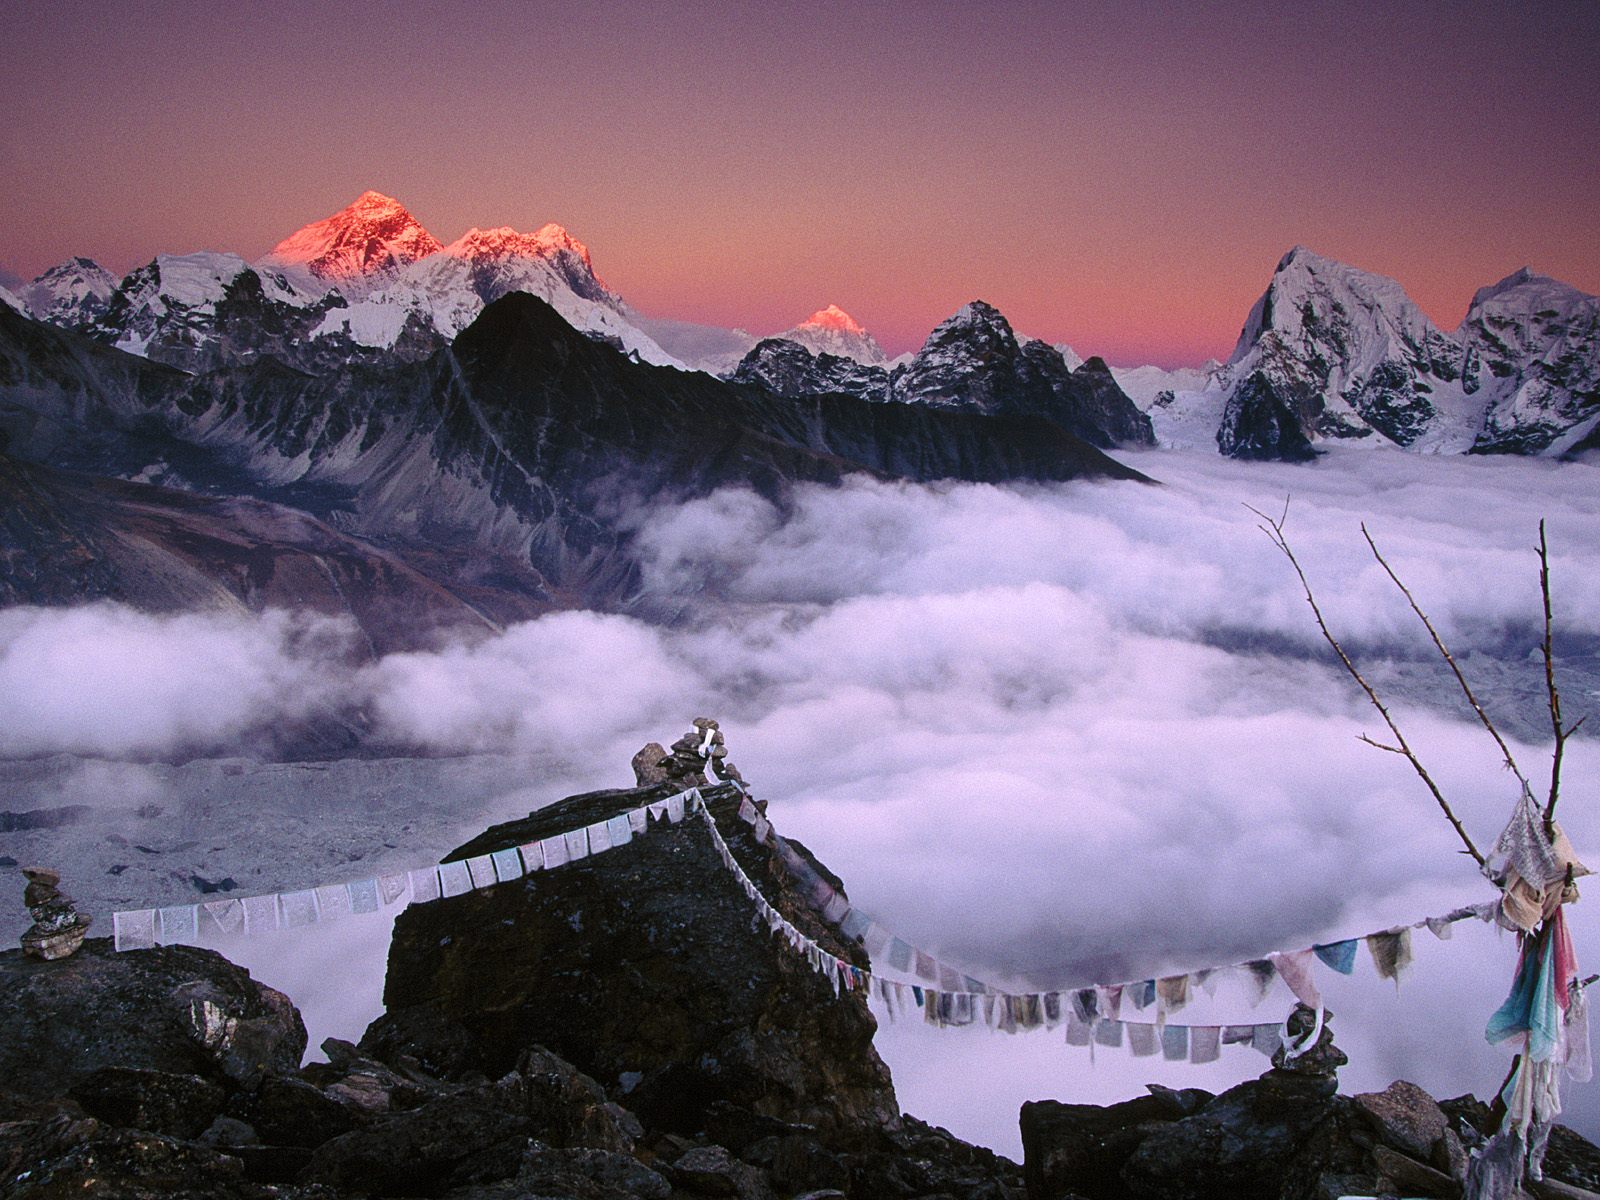 From+Everest+to+Taweche,+Himalayas,+Nepal.jpg